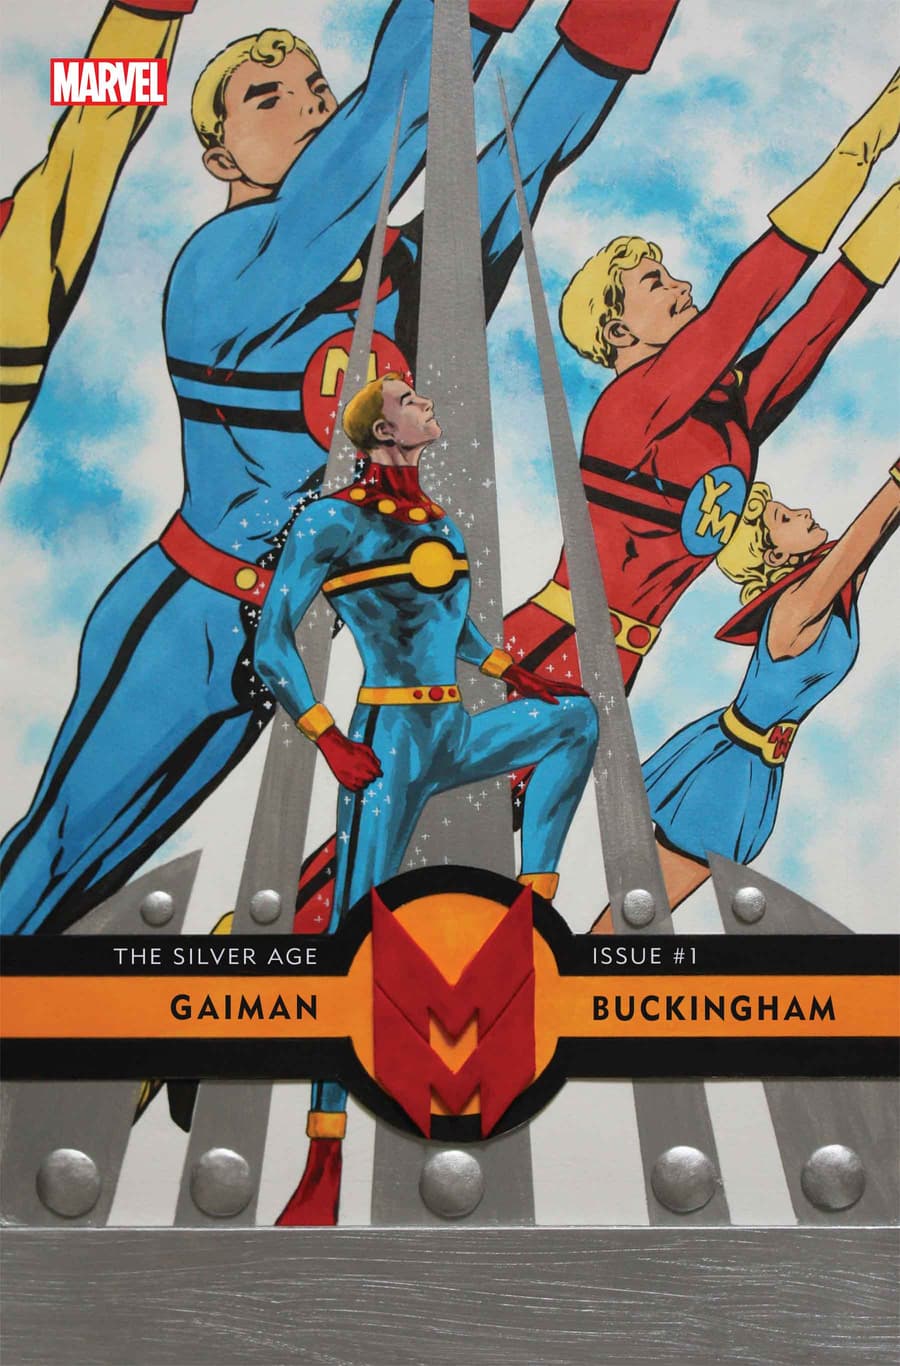 MIRACLEMAN BY GAIMAN & BUCKINGHAM: THE SILVER AGE (2022) #1 cover by Mark Buckingham